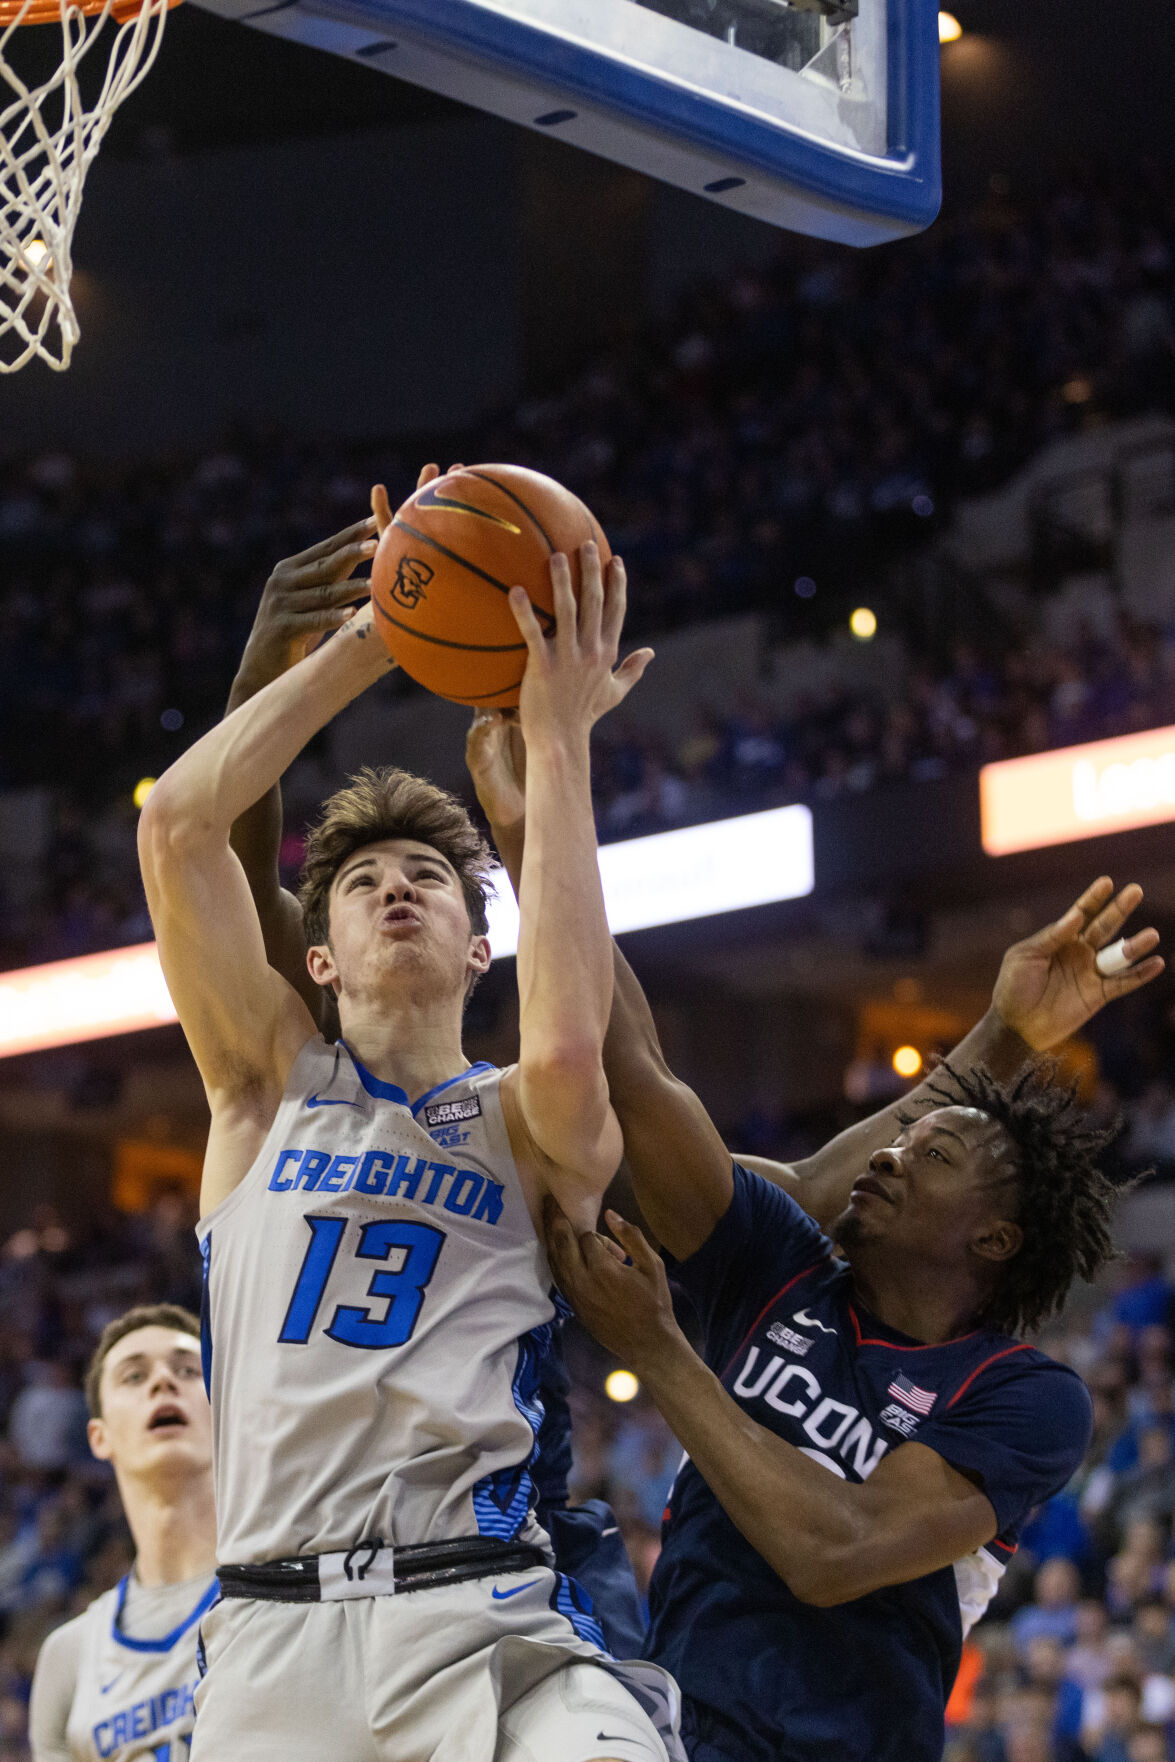 Creighton can't overcome Providence in double-OT, snaps eight-game